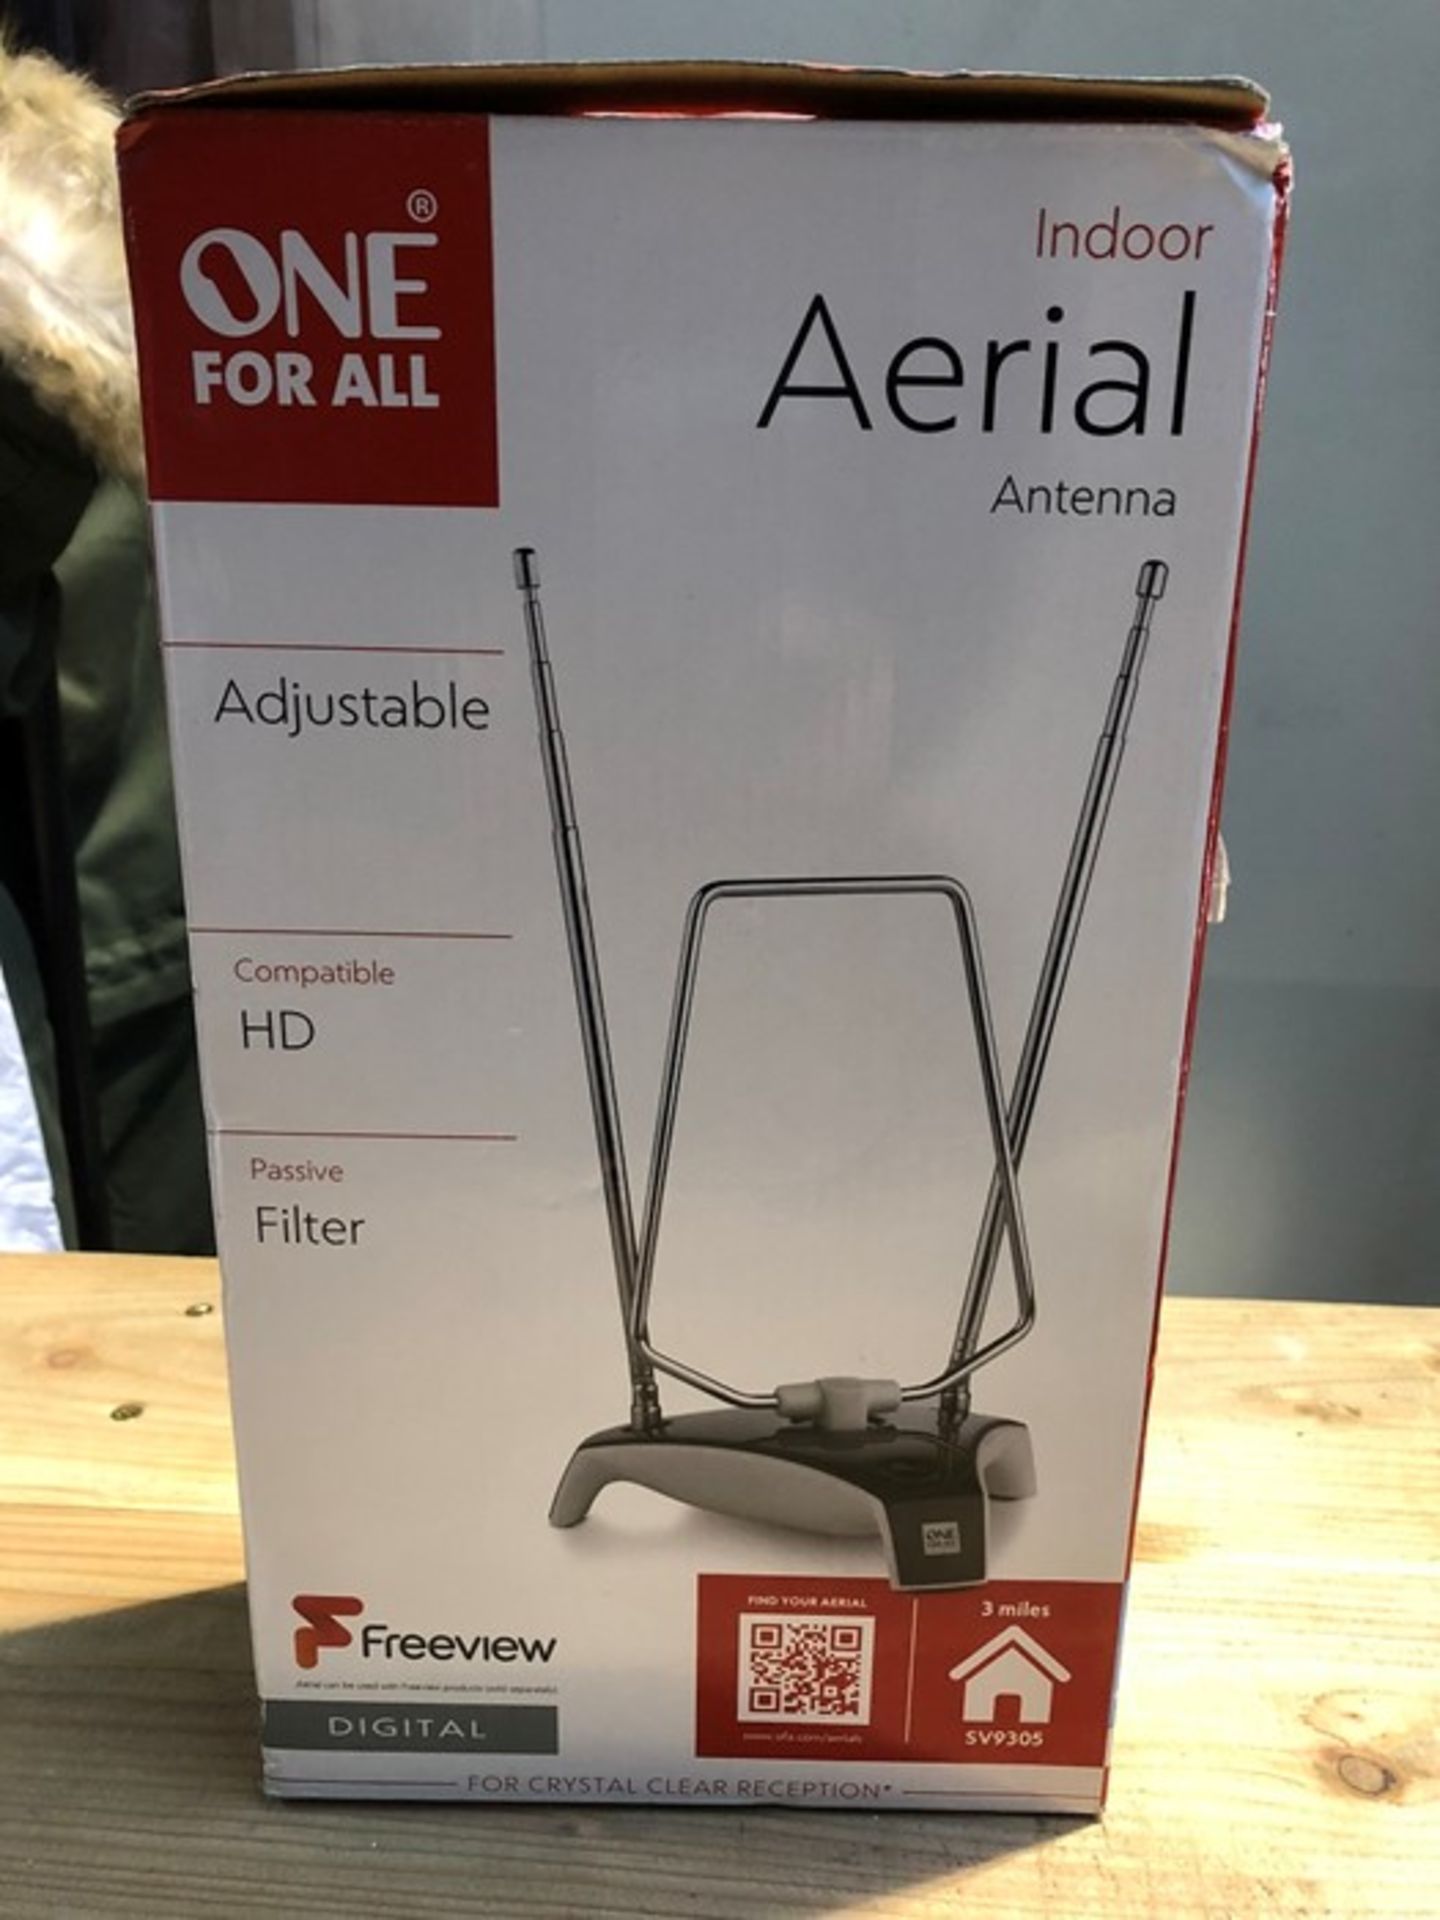 1 BOXED ONE FOR ALL INDOOR HD AERIAL ANTENNA - SV9305 / RRP £31.99 / BL - 9227 (PUBLIC VIEWING